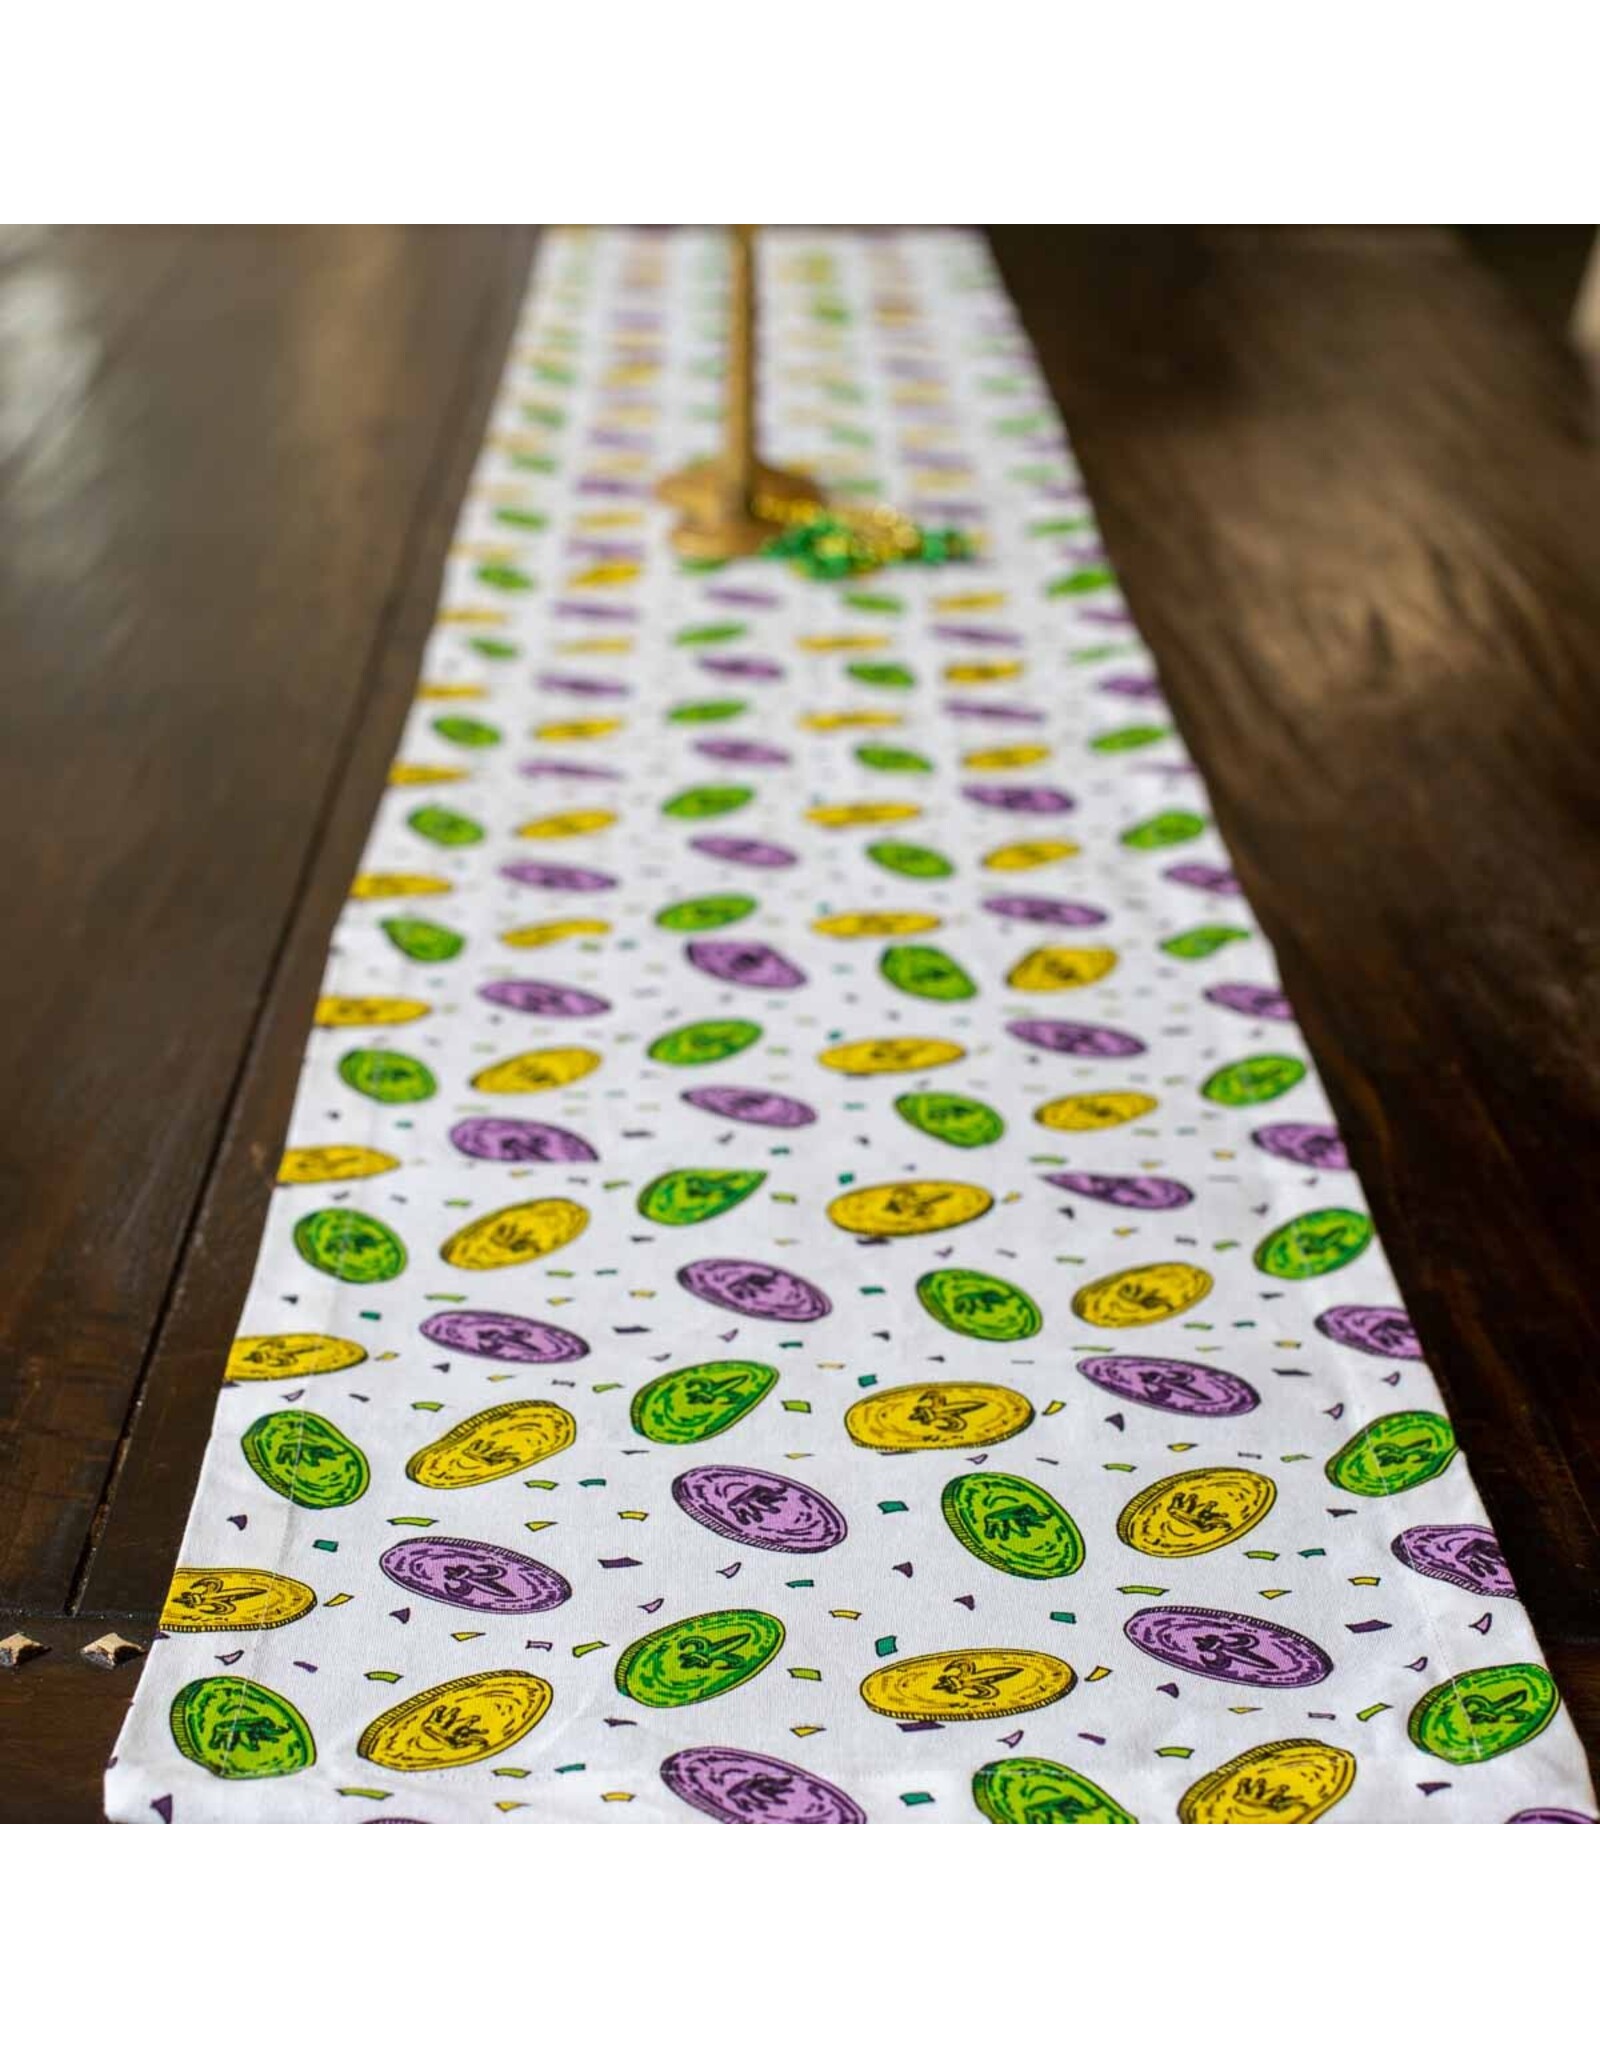 The Royal Standard Mardi Gras Doubloons Table Runner